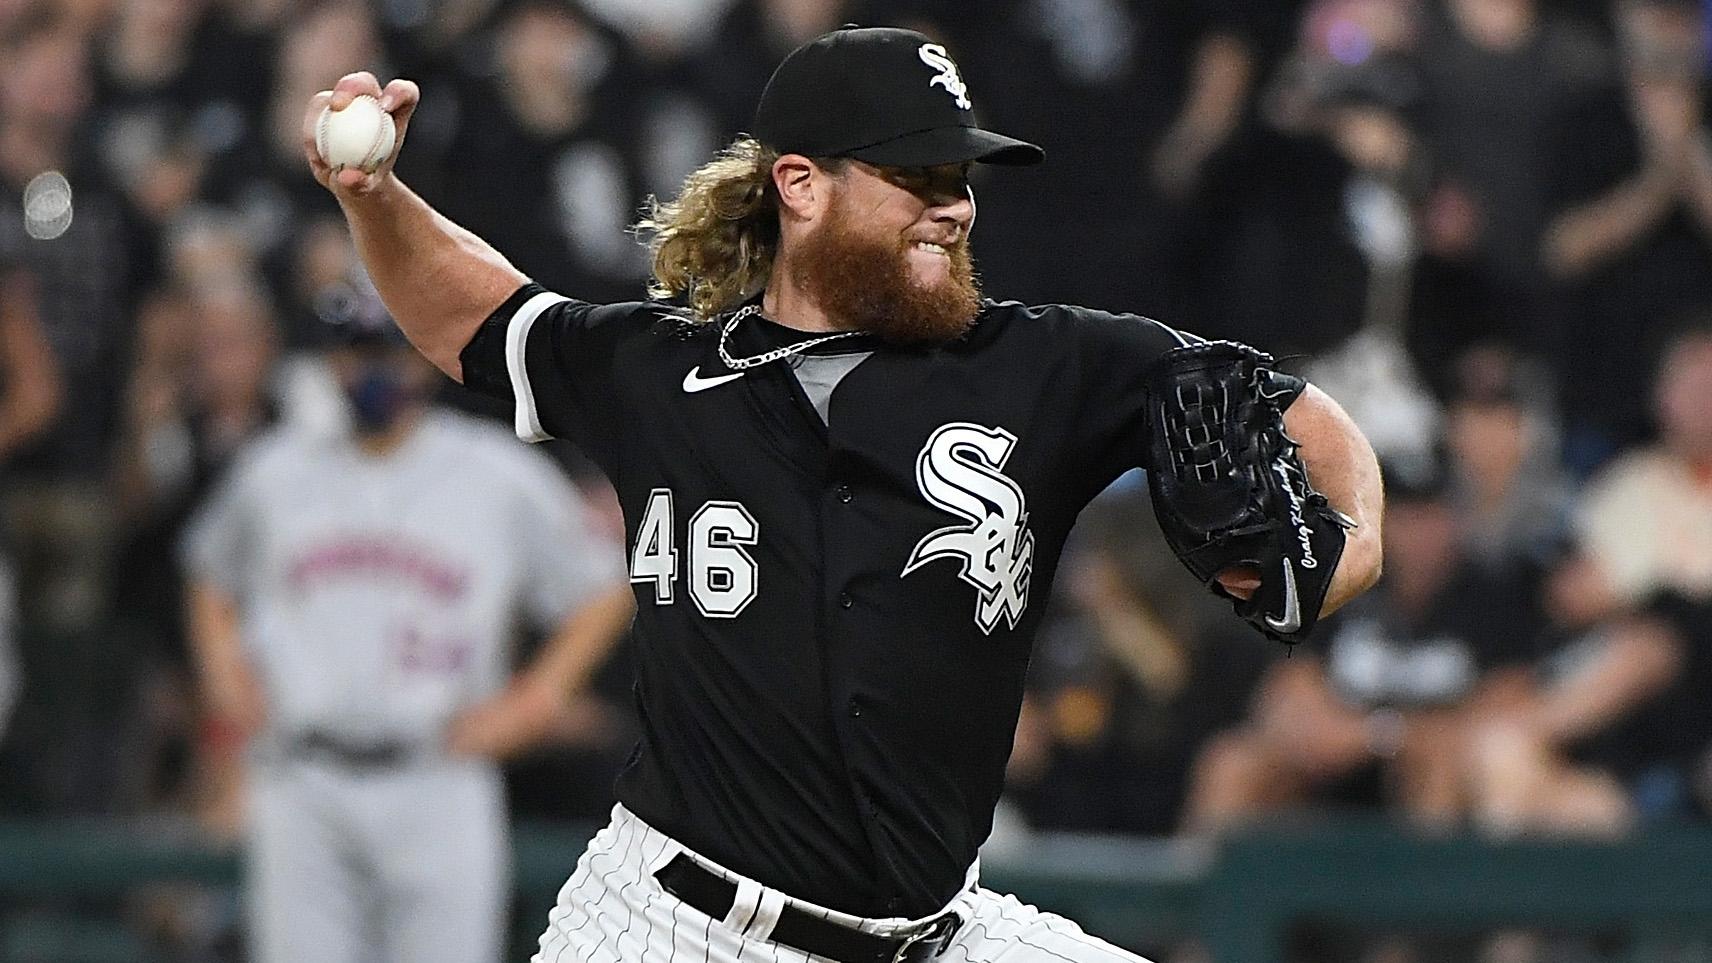 Oct 10, 2021; Chicago, Illinois, USA; Chicago White Sox relief pitcher Craig Kimbrel (46) pitches against the Houston Astros during the eighth inning in game three of the 2021 ALDS at Guaranteed Rate Field. / Matt Marton-USA TODAY Sports